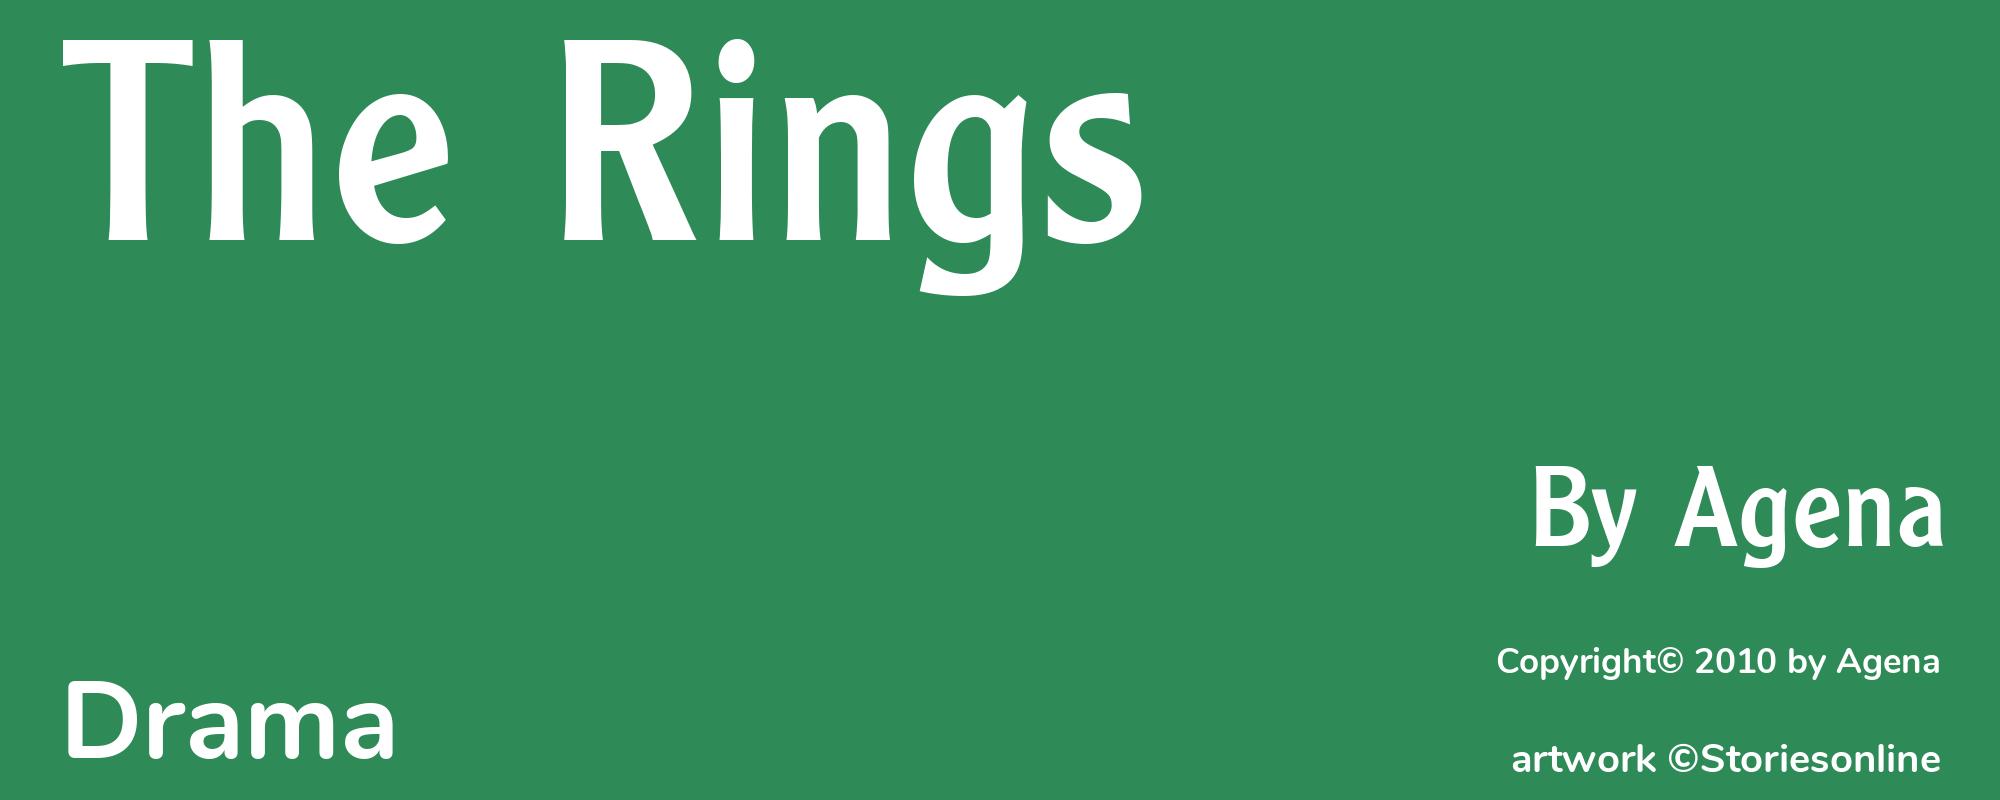 The Rings - Cover